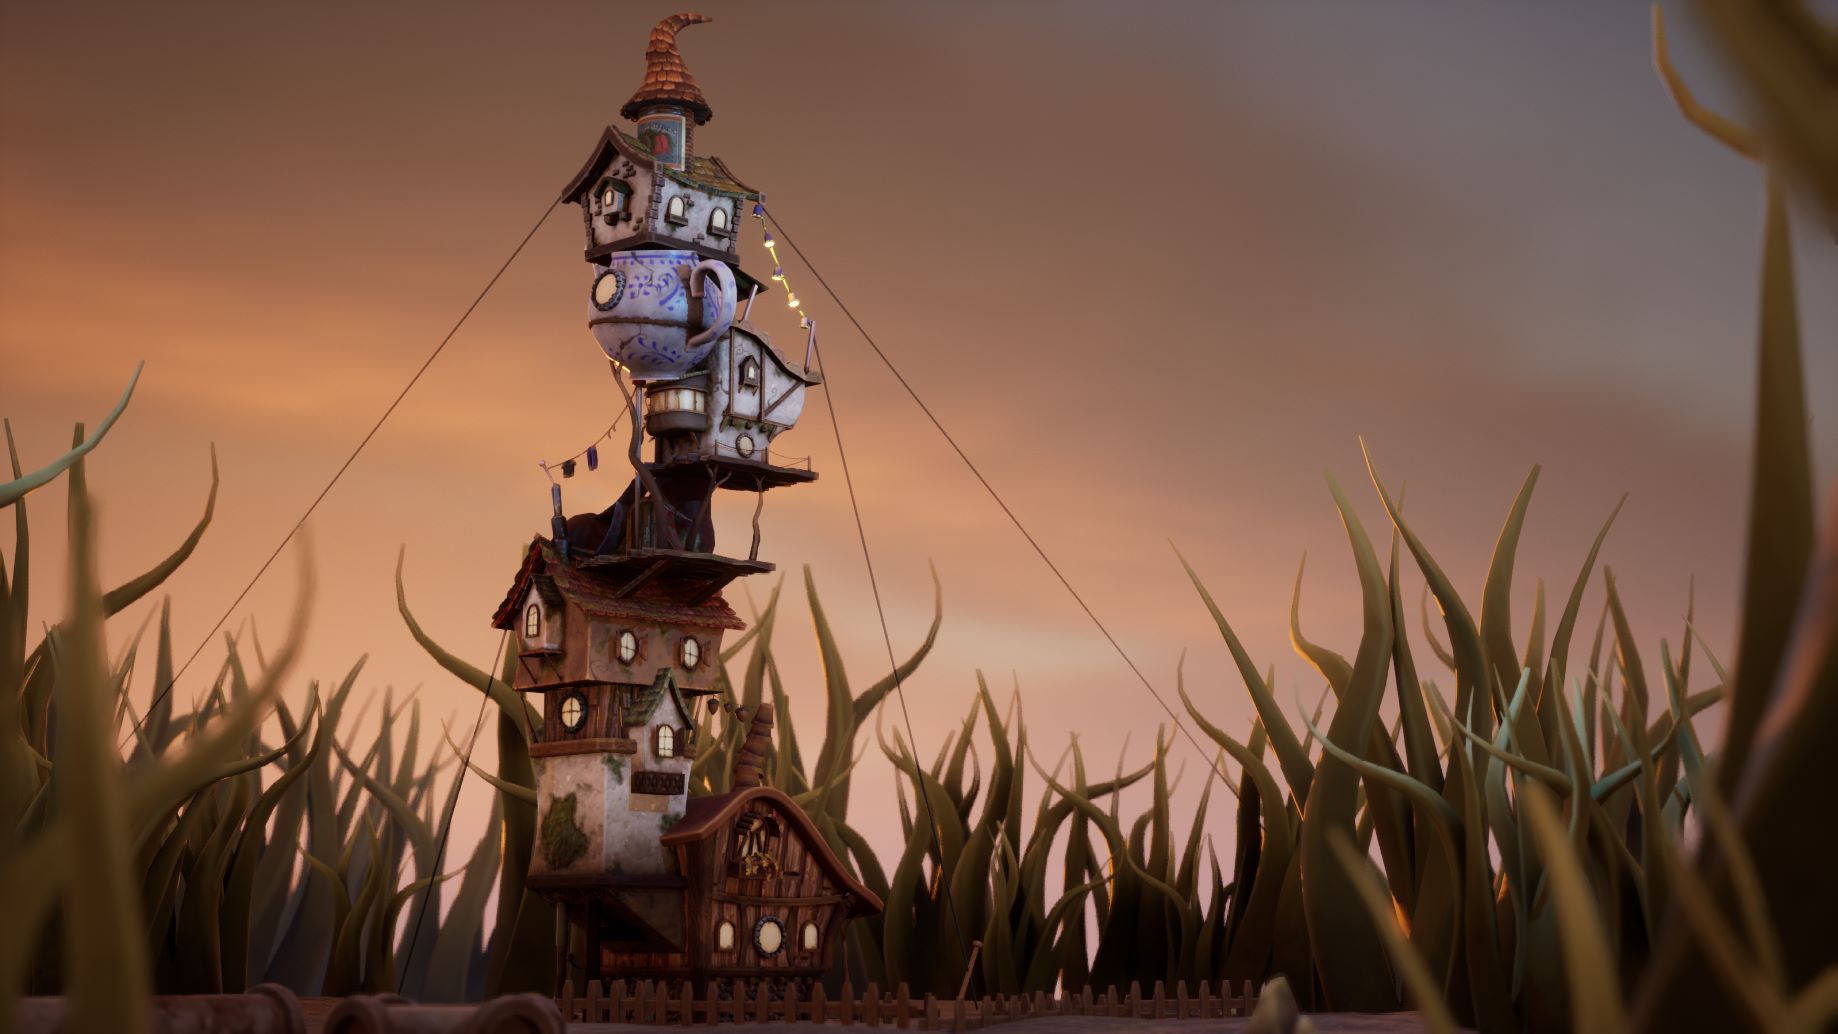 Digital artwork by Megan Griib showing a tall rickety house built out of 'borrowed' things.